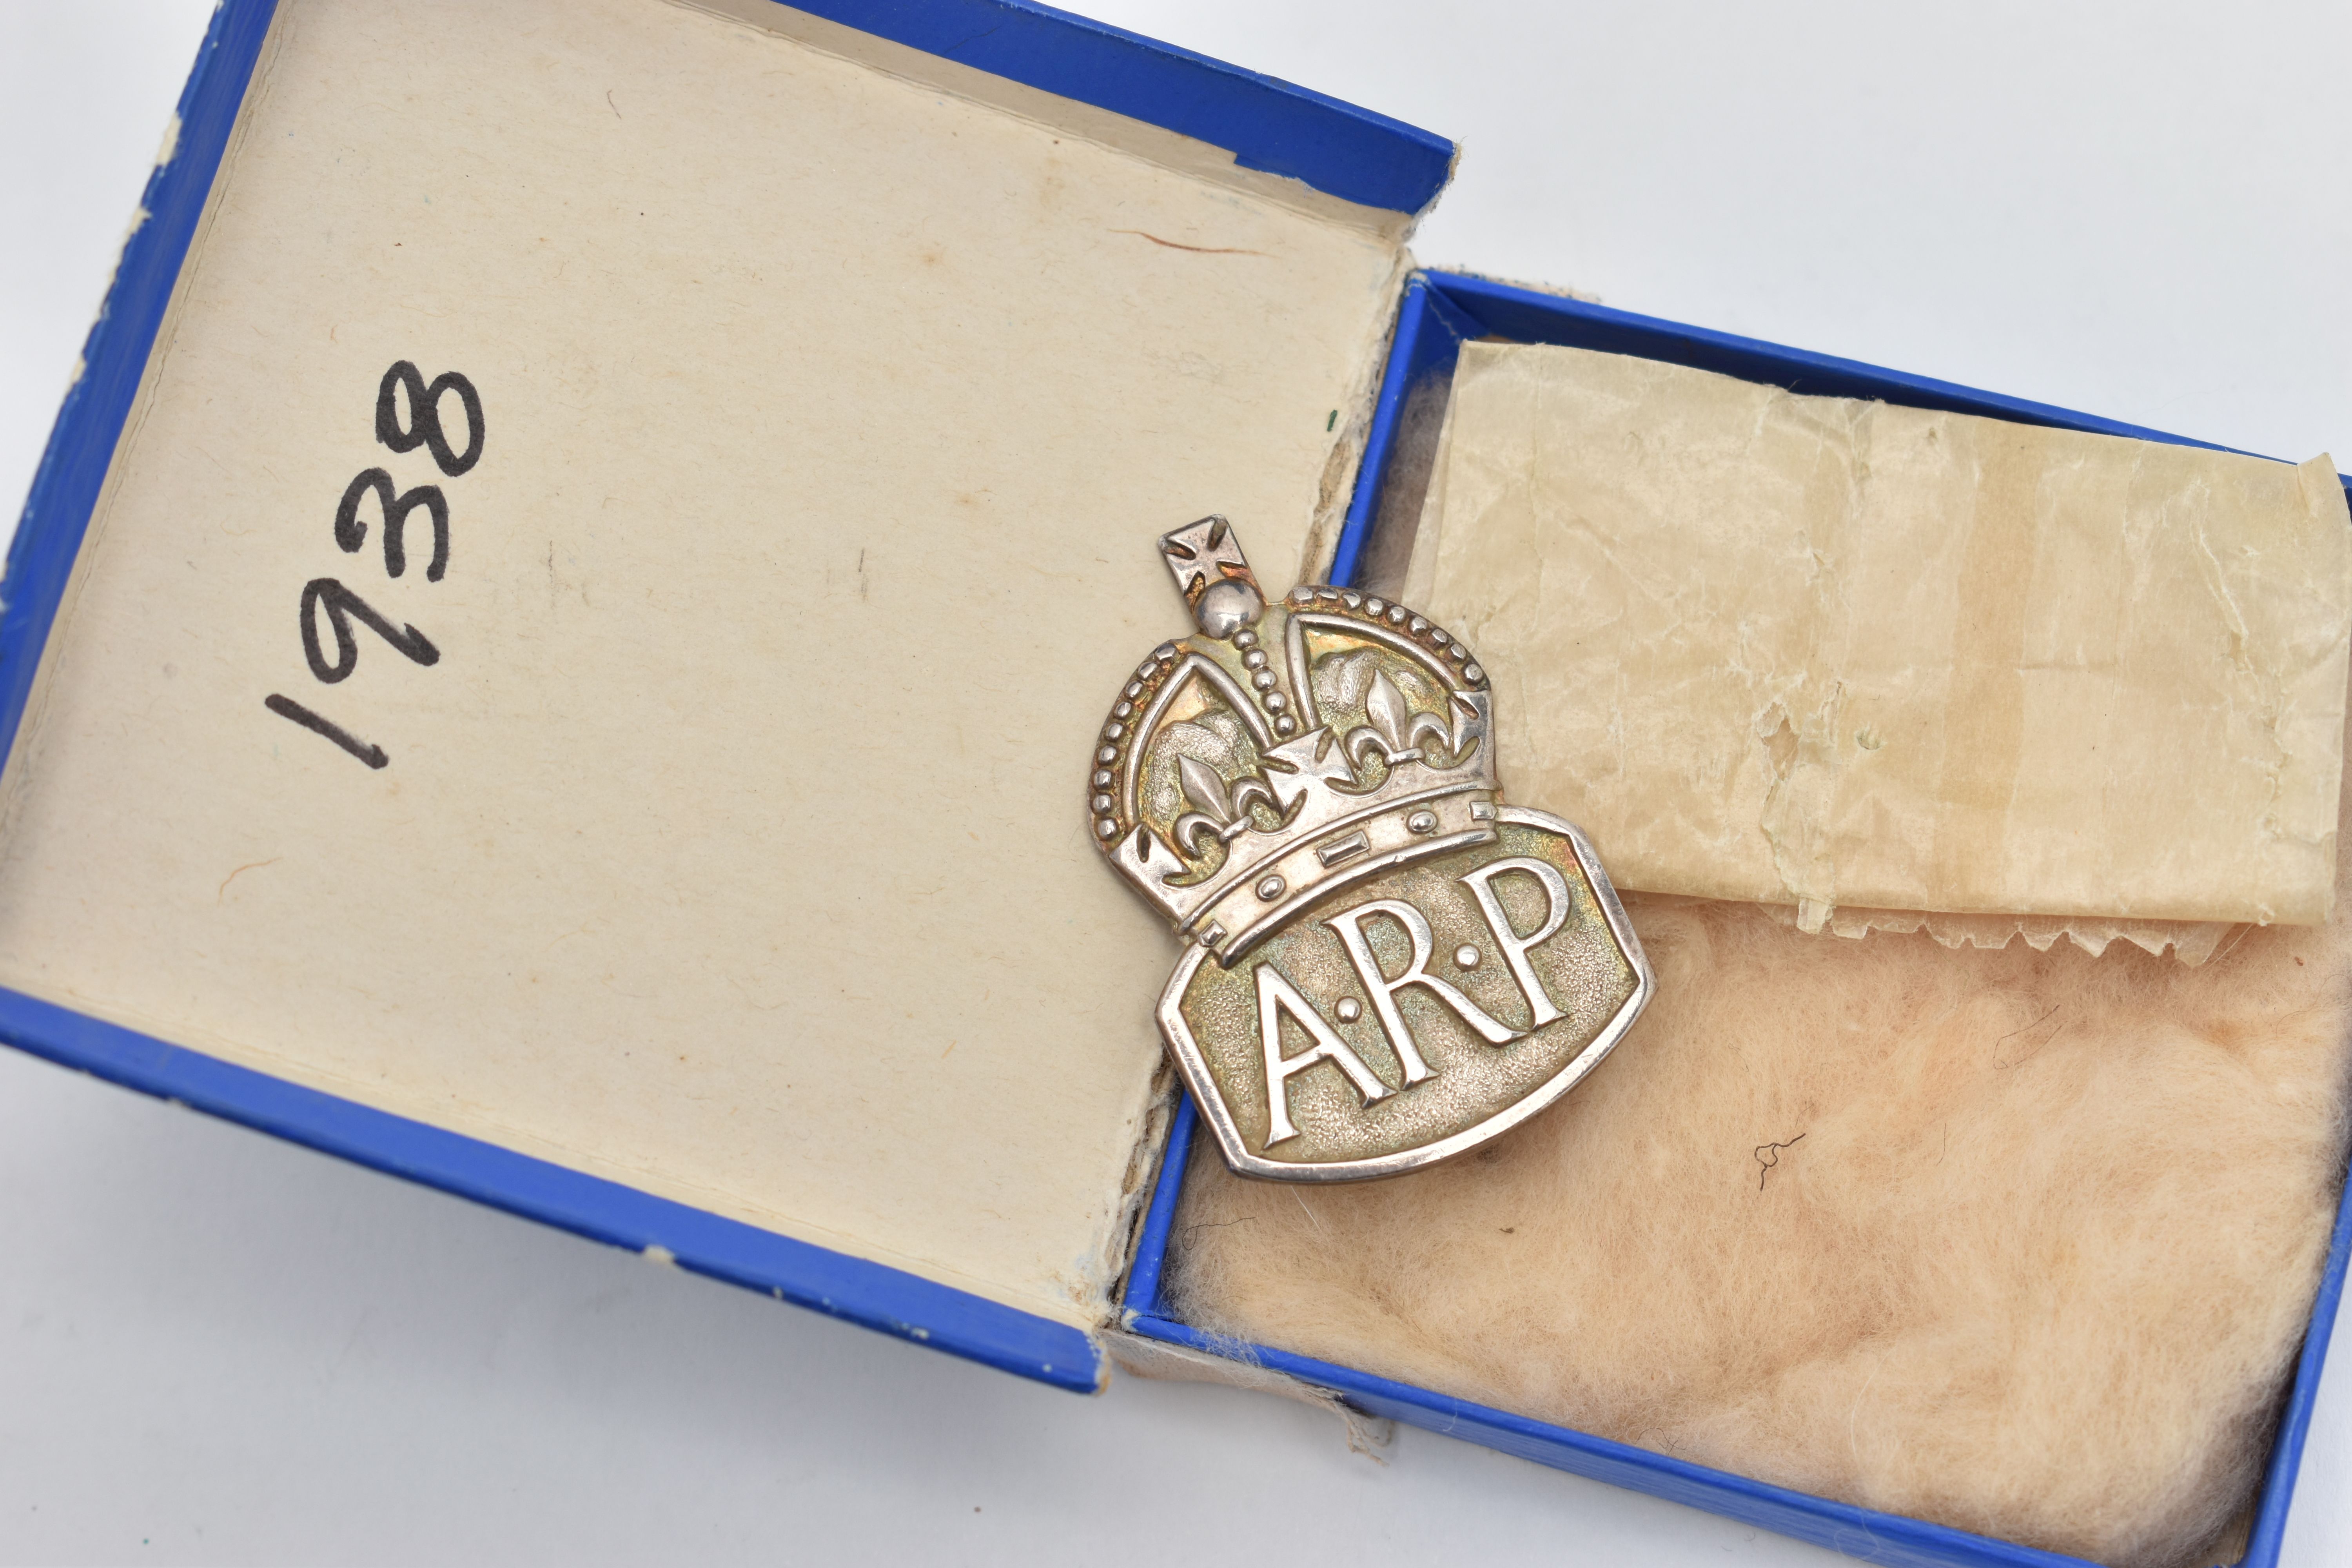 A SILVER 'A.R.P' BADGE, hallmarked 'Royal Mint' London 1938, fitted with pin and C clasp, - Image 2 of 3